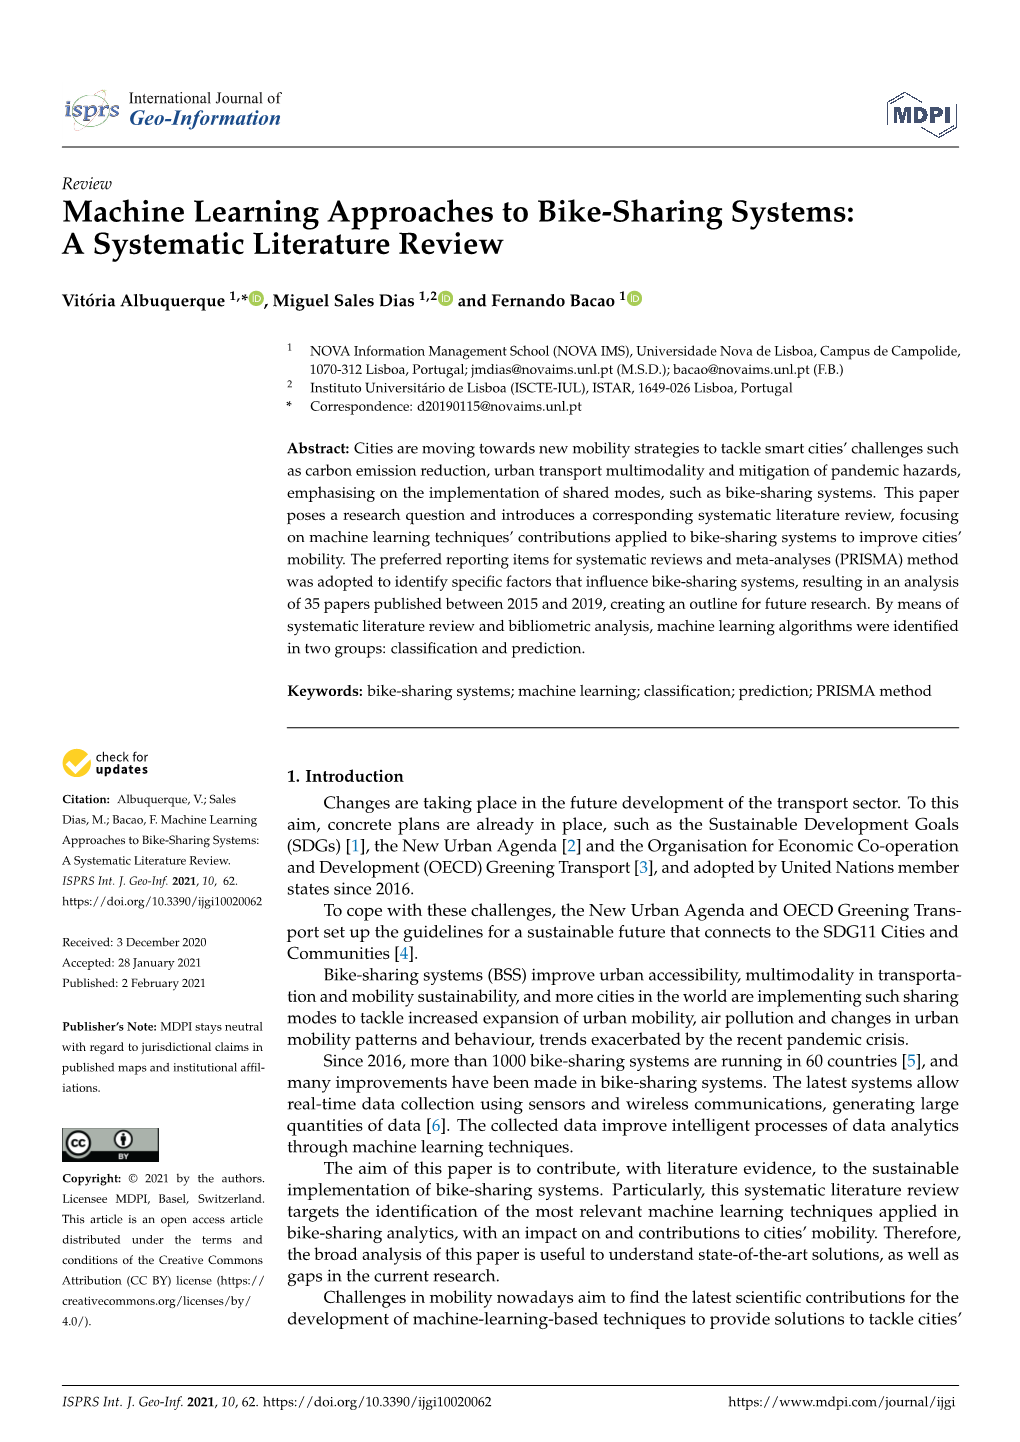 Machine Learning Approaches to Bike-Sharing Systems: a Systematic Literature Review